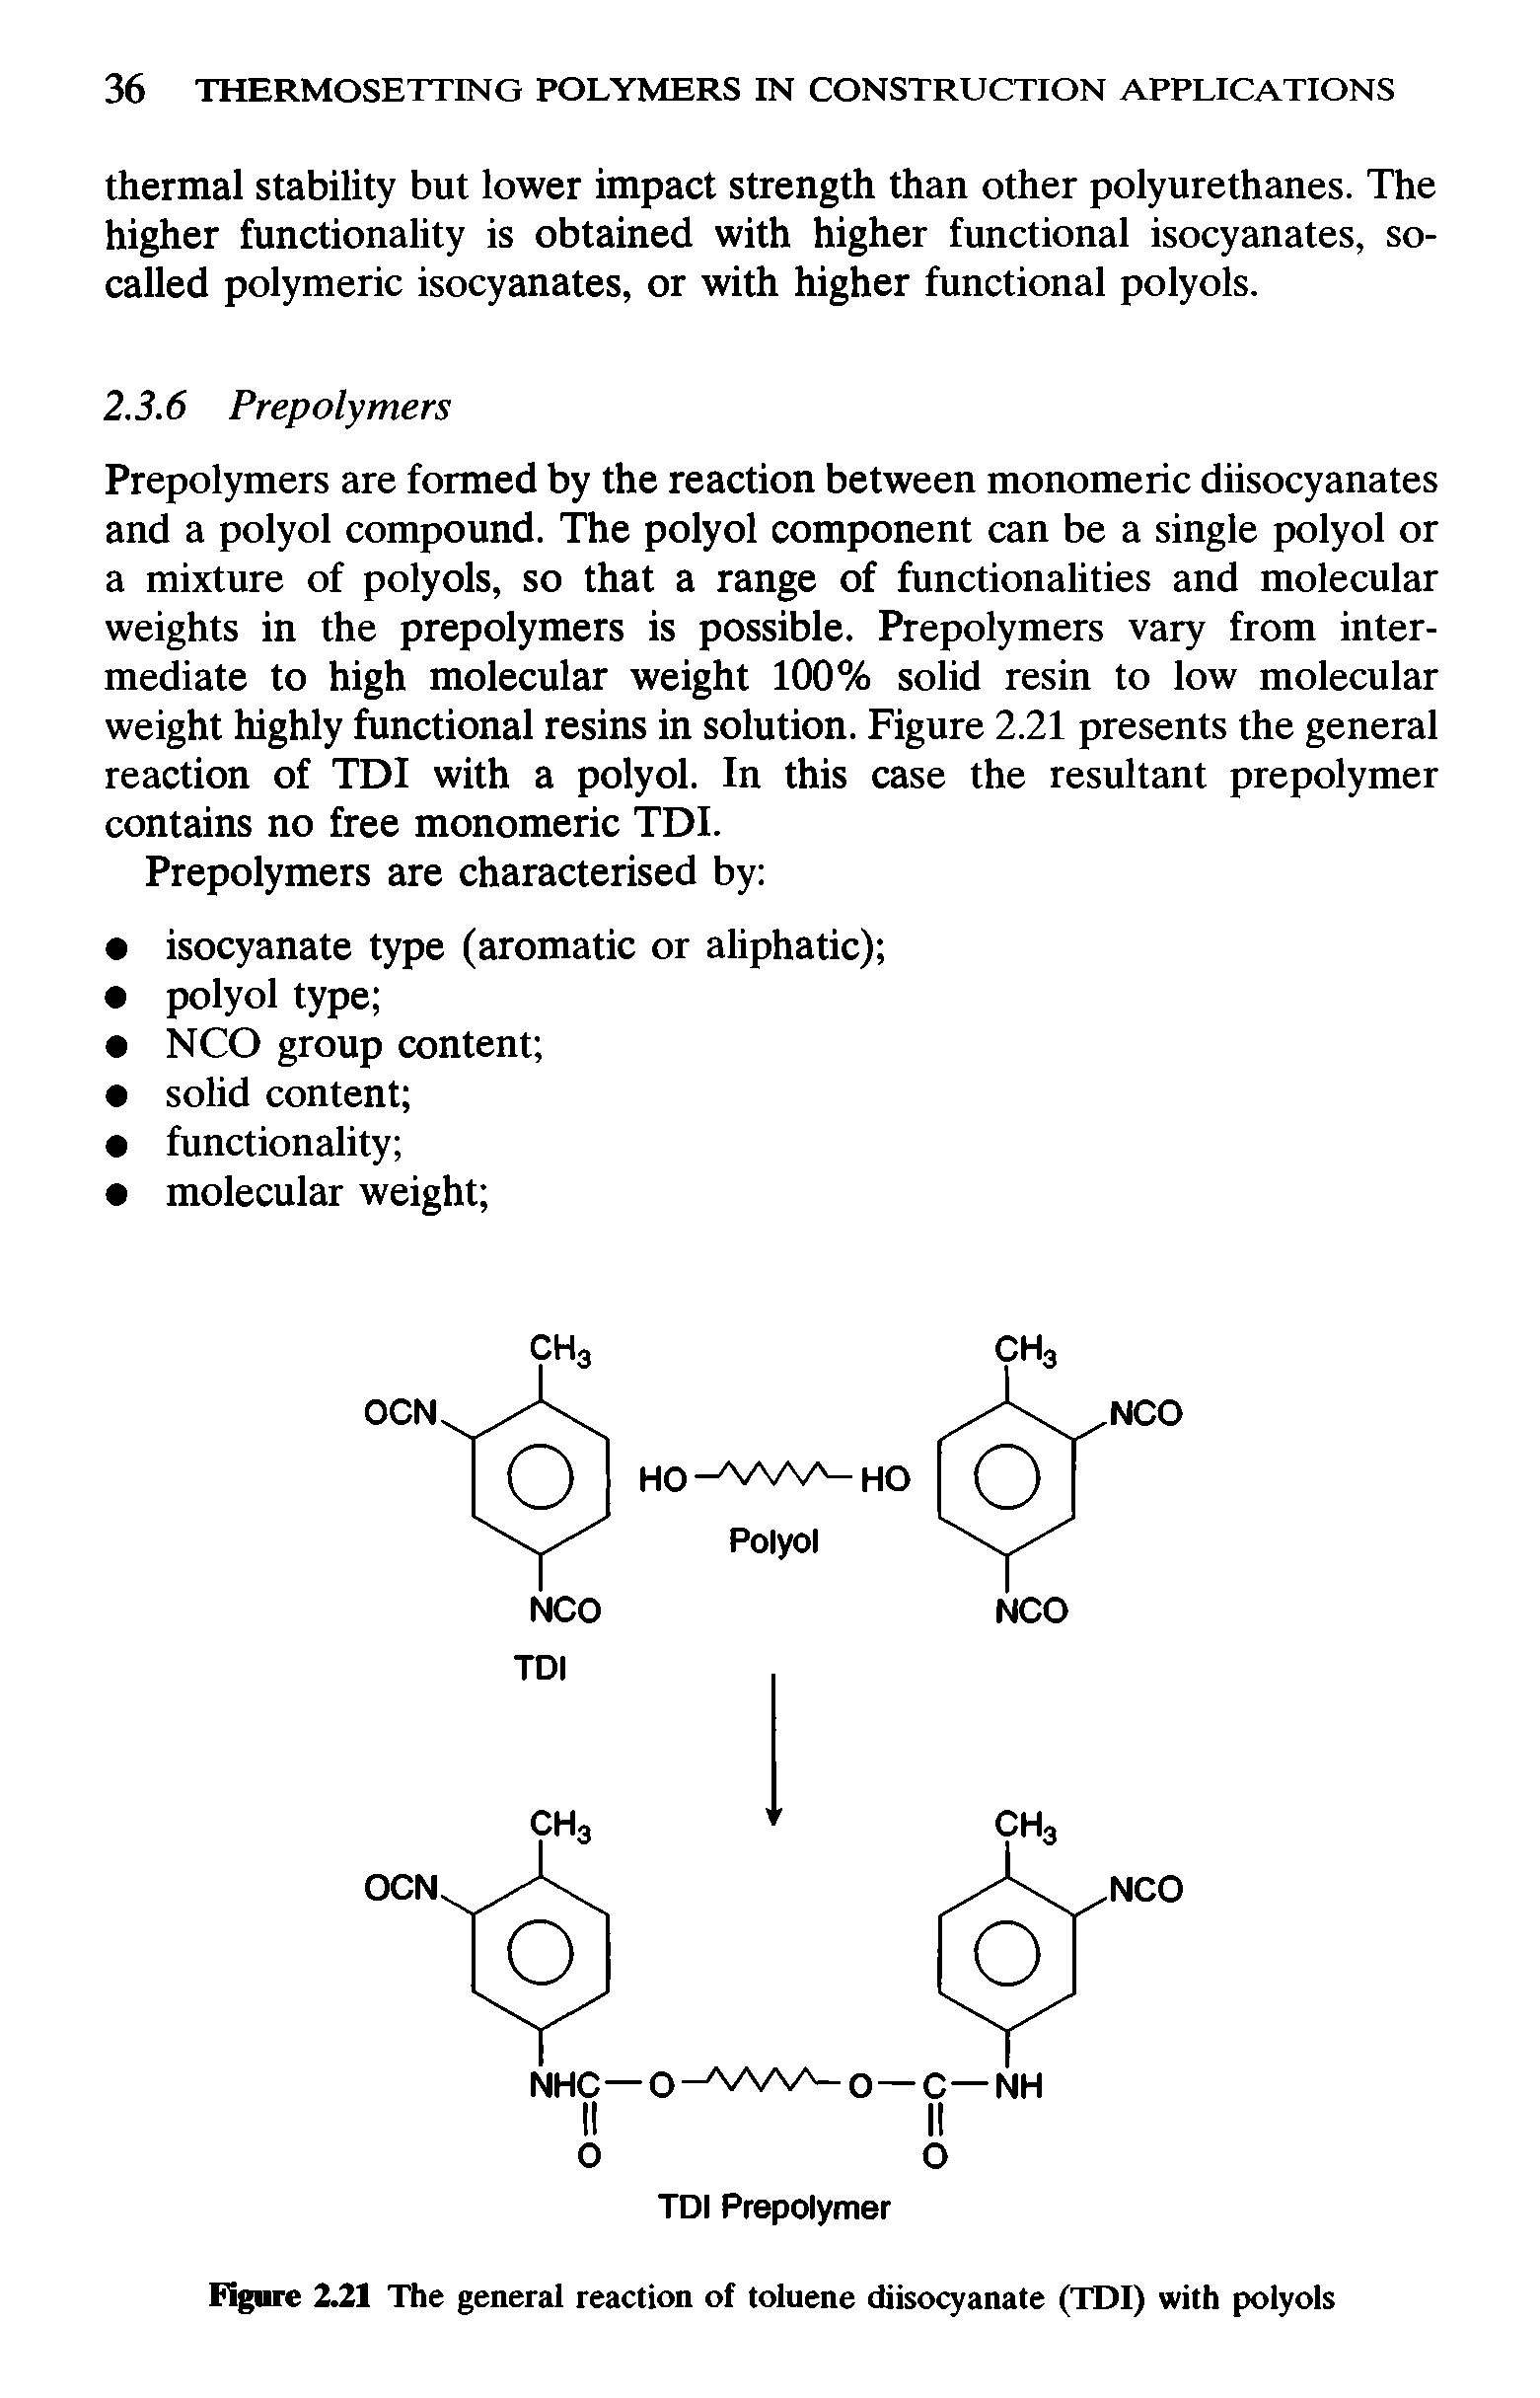 Figure Z21 The general reaction of toluene diisocyanate (TDI) with polyols...